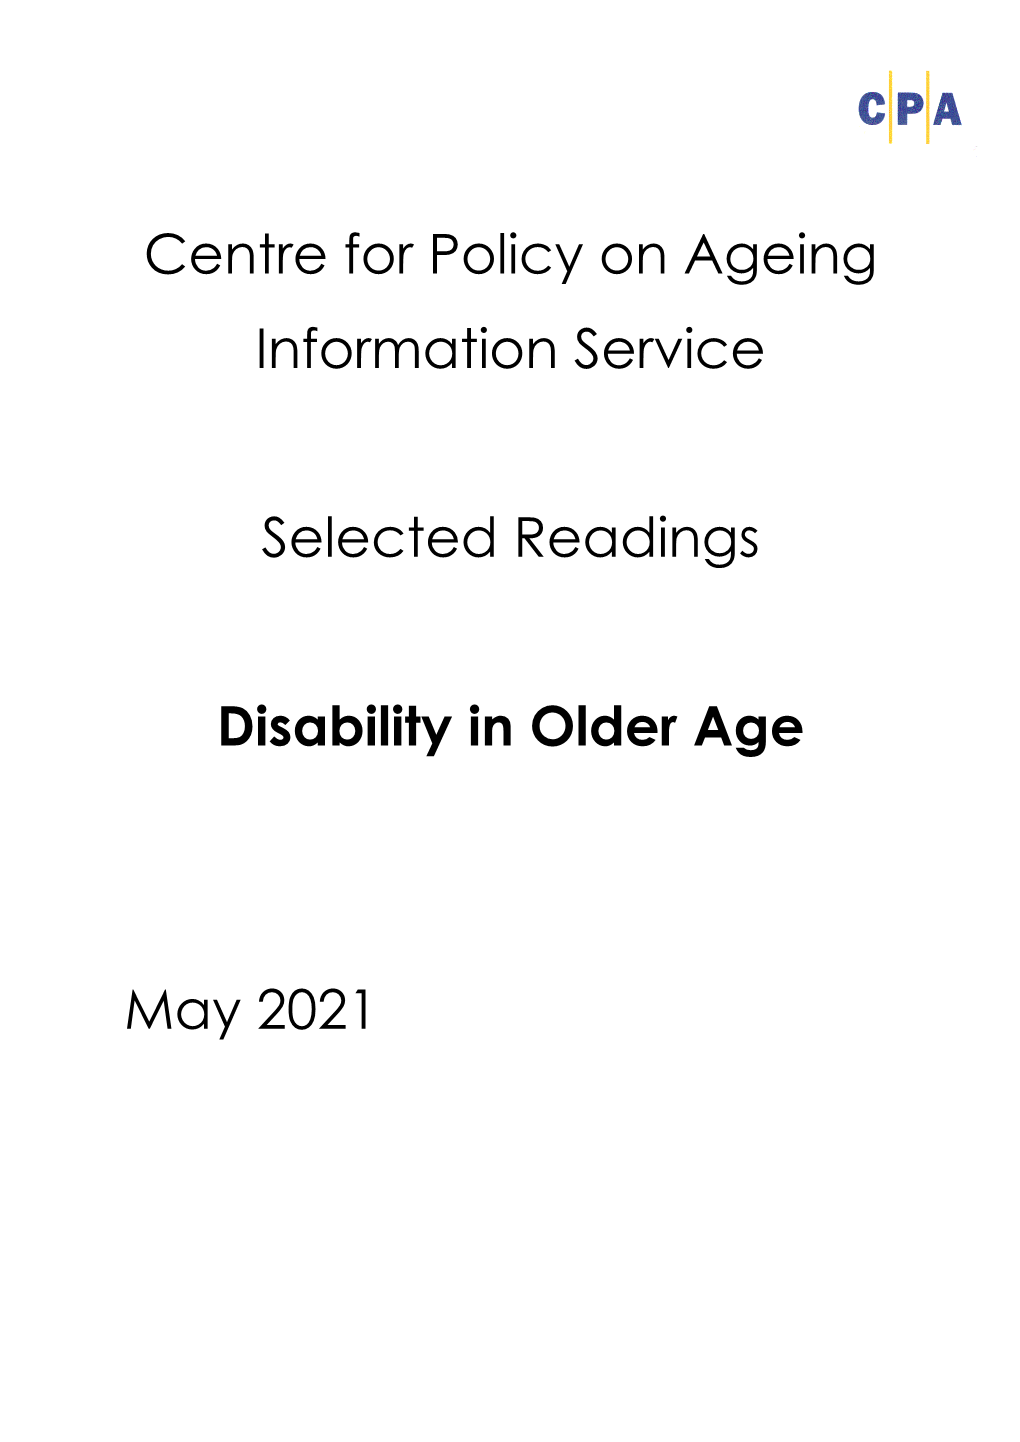 Disability in Older Age